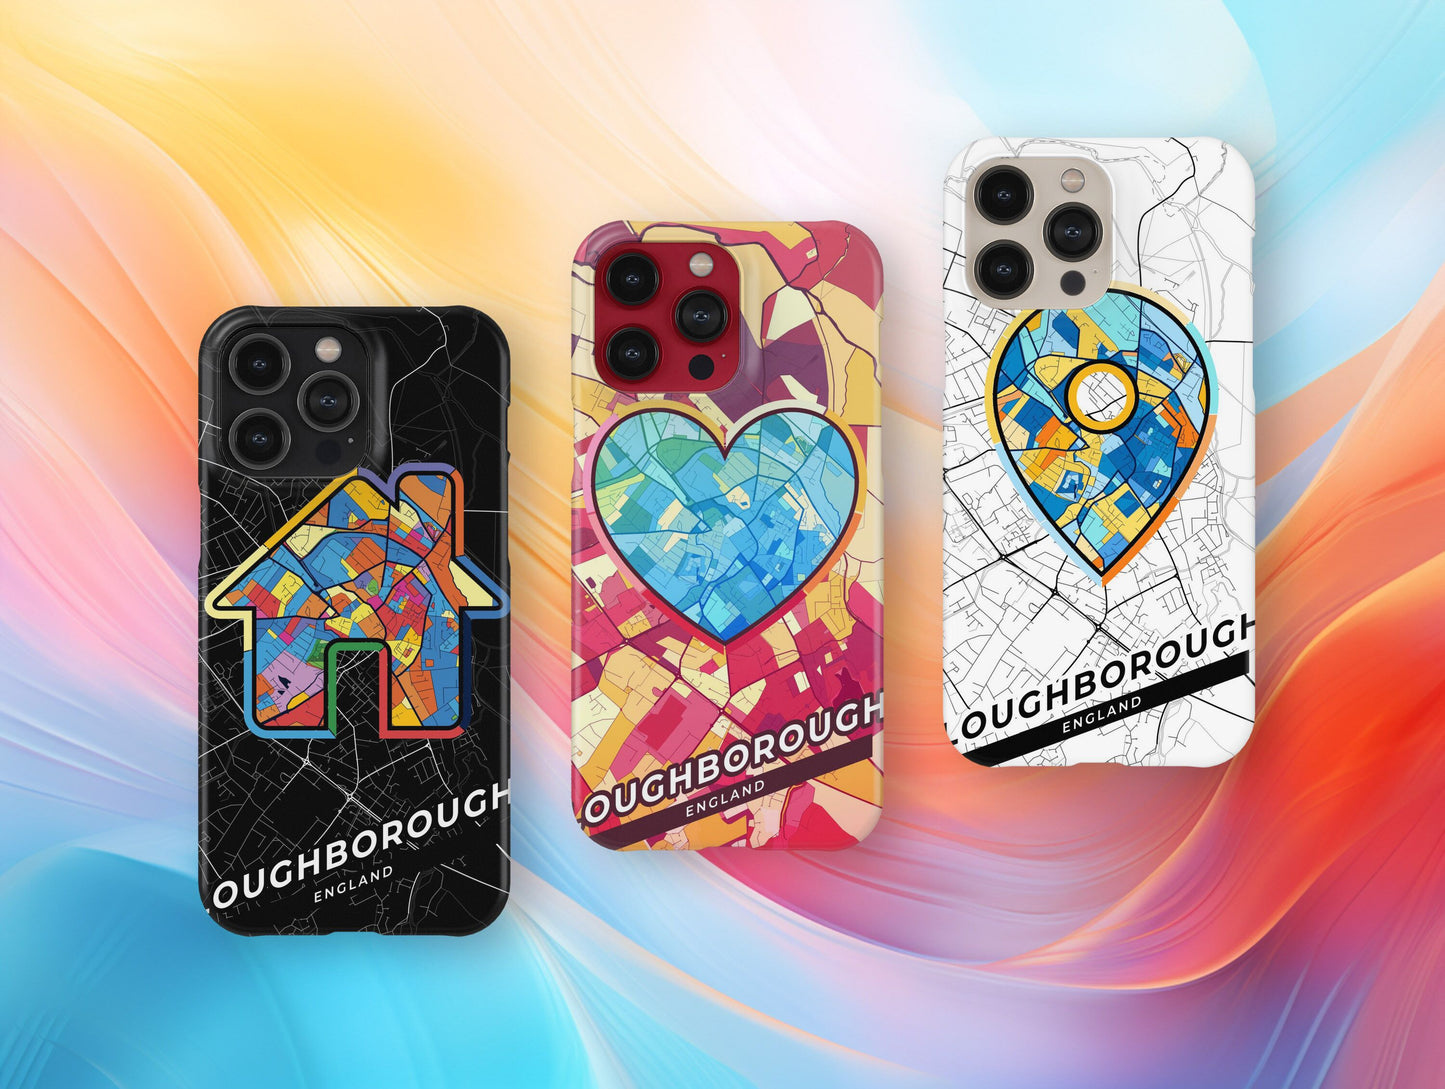 Loughborough England slim phone case with colorful icon. Birthday, wedding or housewarming gift. Couple match cases.